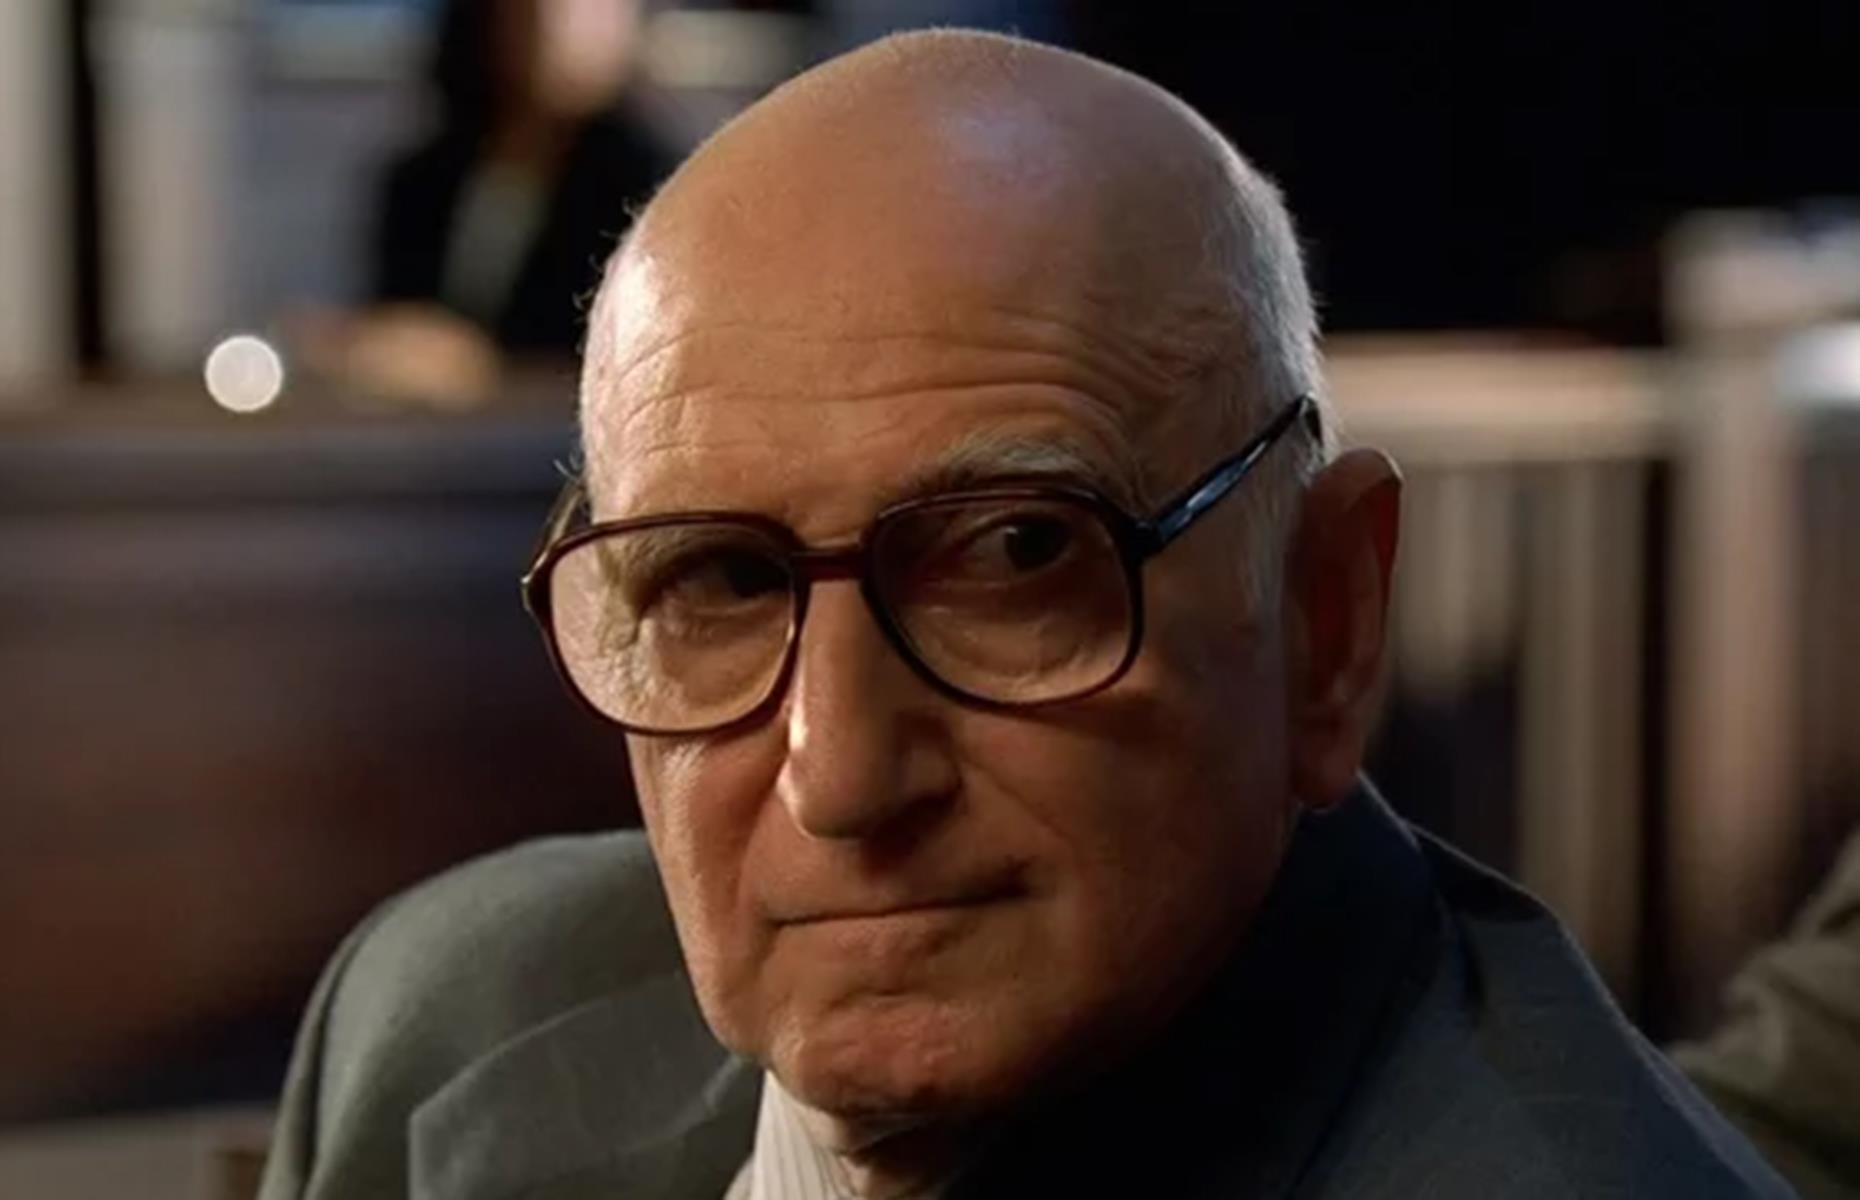 <p>Dominic Chianese played Corrado "Junior" Soprano, Tony's uncle and the former boss of the DiMeo crime family. The character appeared in all six seasons of the beloved show. </p>  <p>Chianese was already an established star before joining <em>The Sopranos</em>, having made his screen debut in the critically acclaimed TV series<em> East Side/West Side </em>in 1964.</p>  <p>He’d also scored roles in several Hollywood hits, including <em>The Godfather Part II</em>, <em>Dog Day Afternoon</em>, and <em>All the President’s Men</em>.</p>